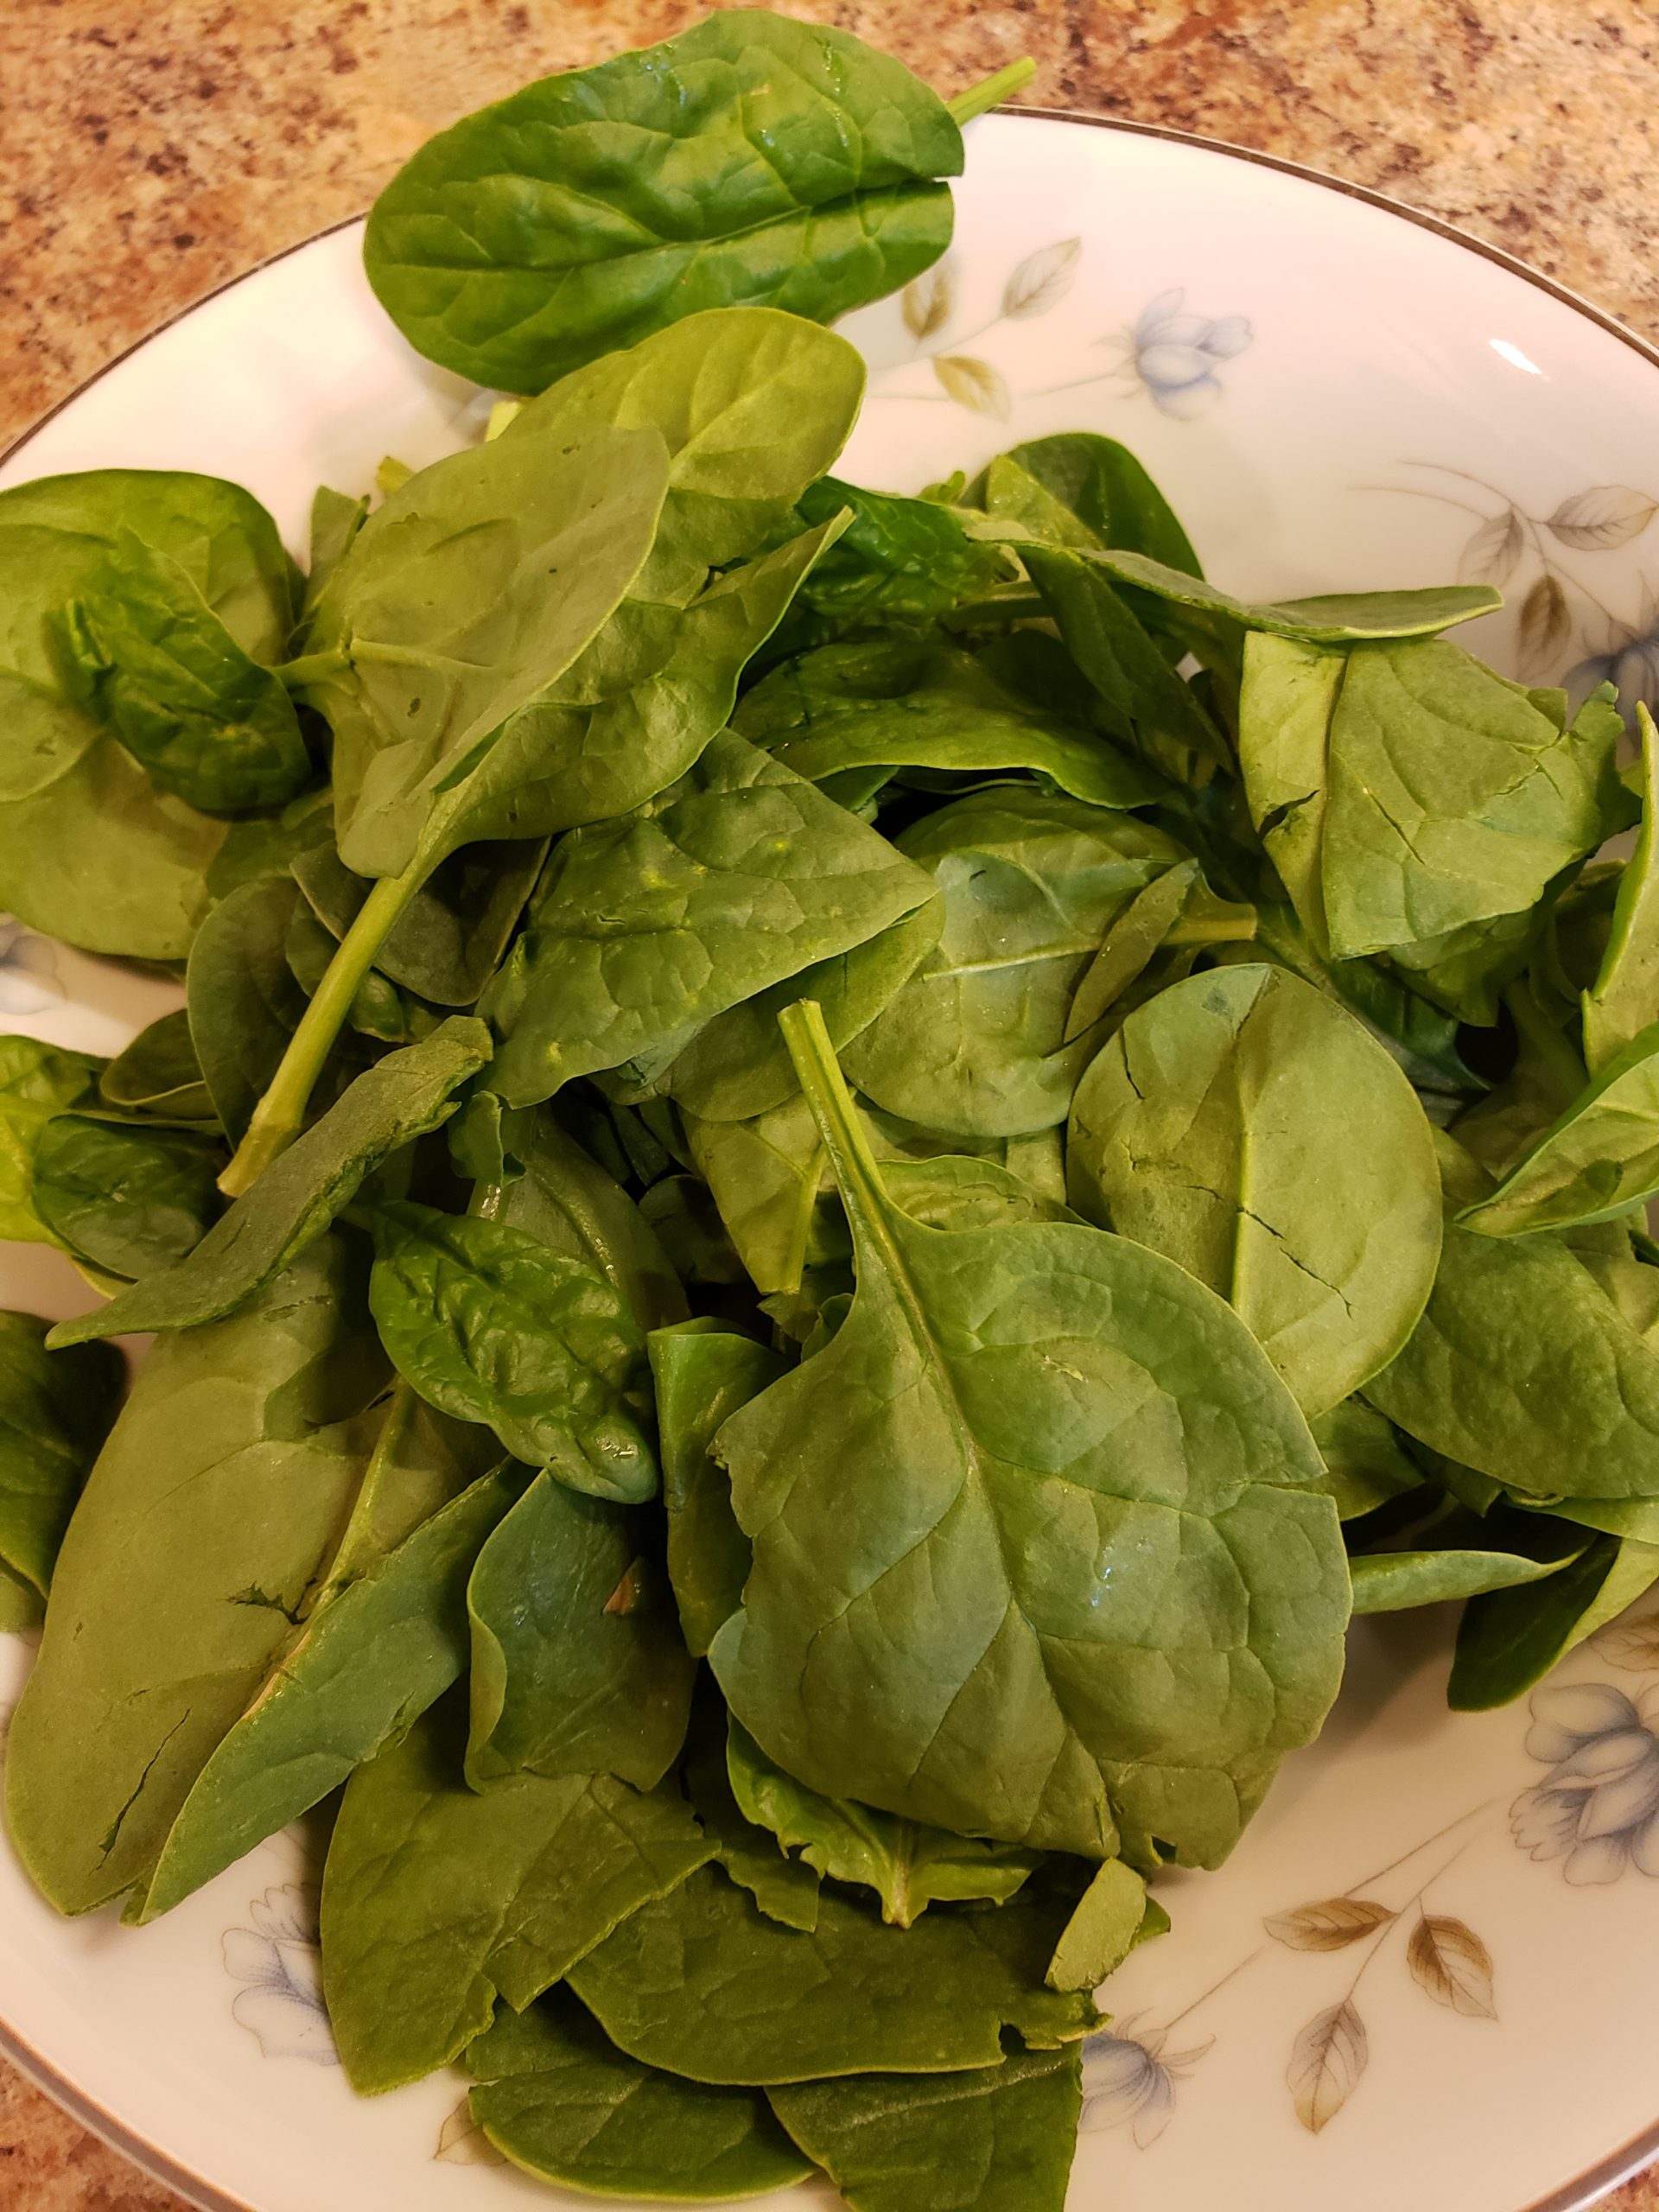 Spinach contains nitrates, compounds that past research shows can improve running performance by delivering more oxygen and nutrients to muscles. In a new study from the National Council of Research in Italy, scientists gave participants two cups of nitrate-rich spinach juice or a placebo for six days.